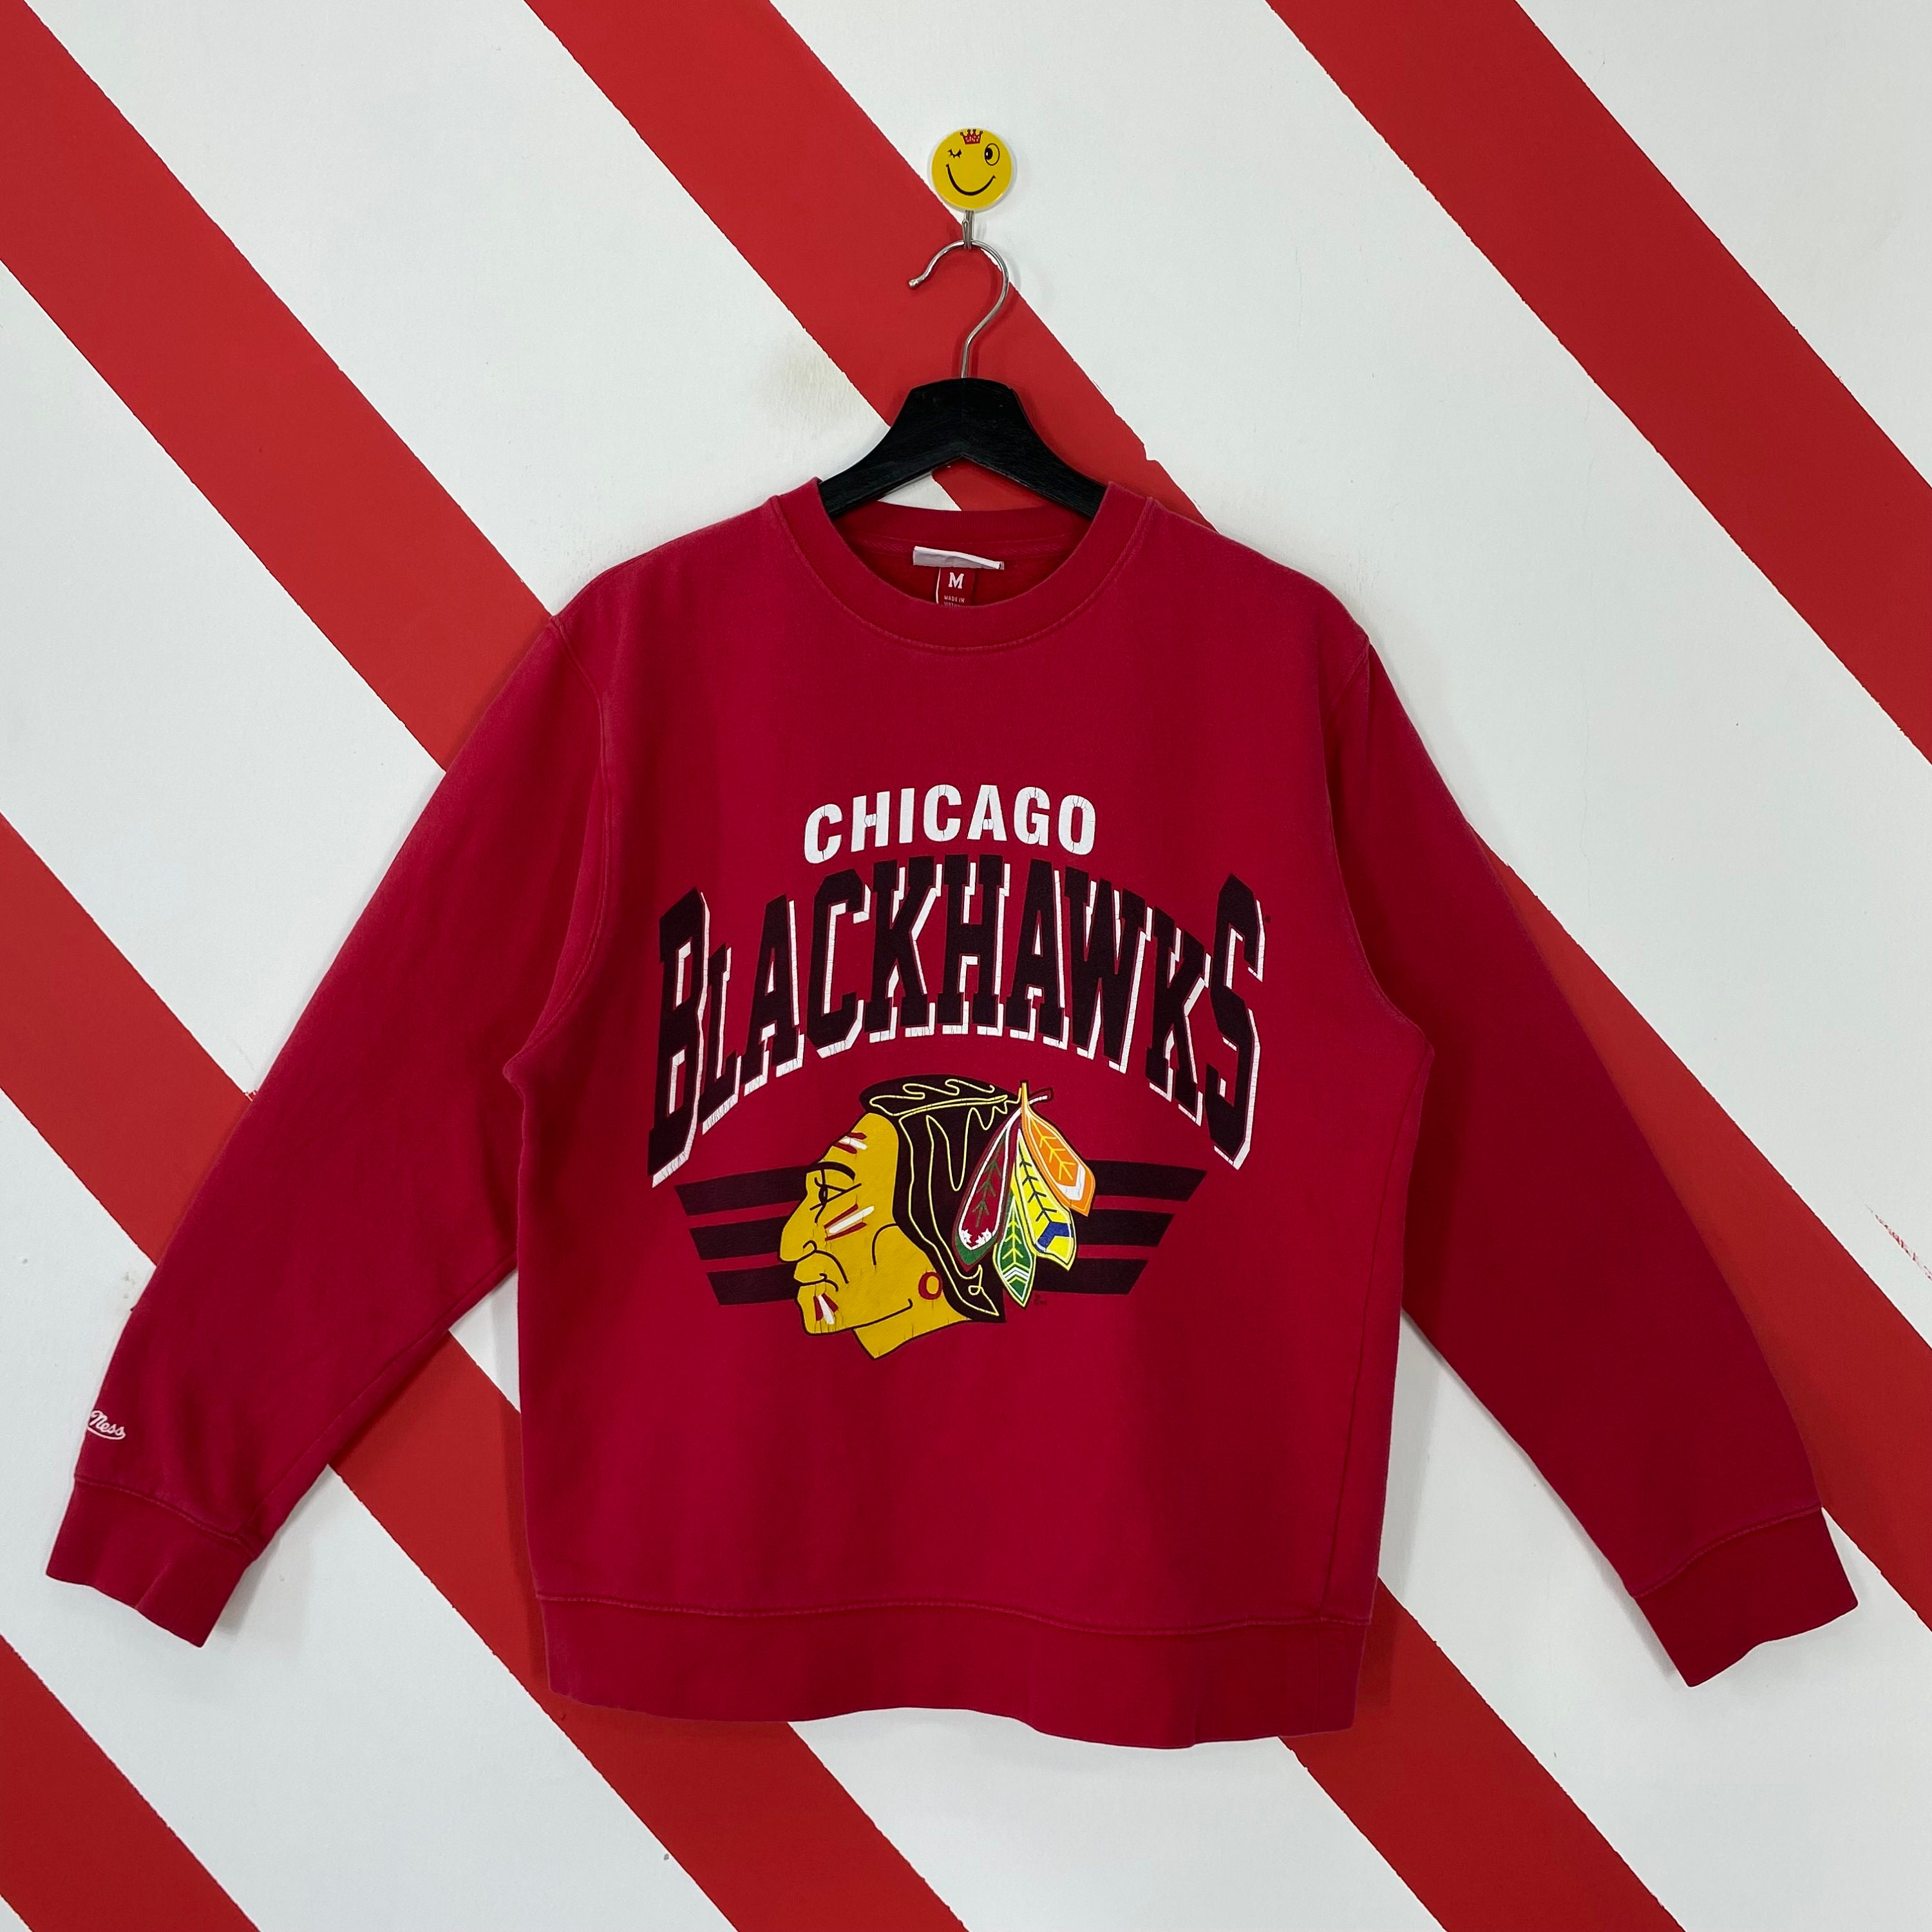 Chicago Blackhawks Hockey Team Vintage Logo Made from old recycled Illinois  License Plates Red T-Shirt